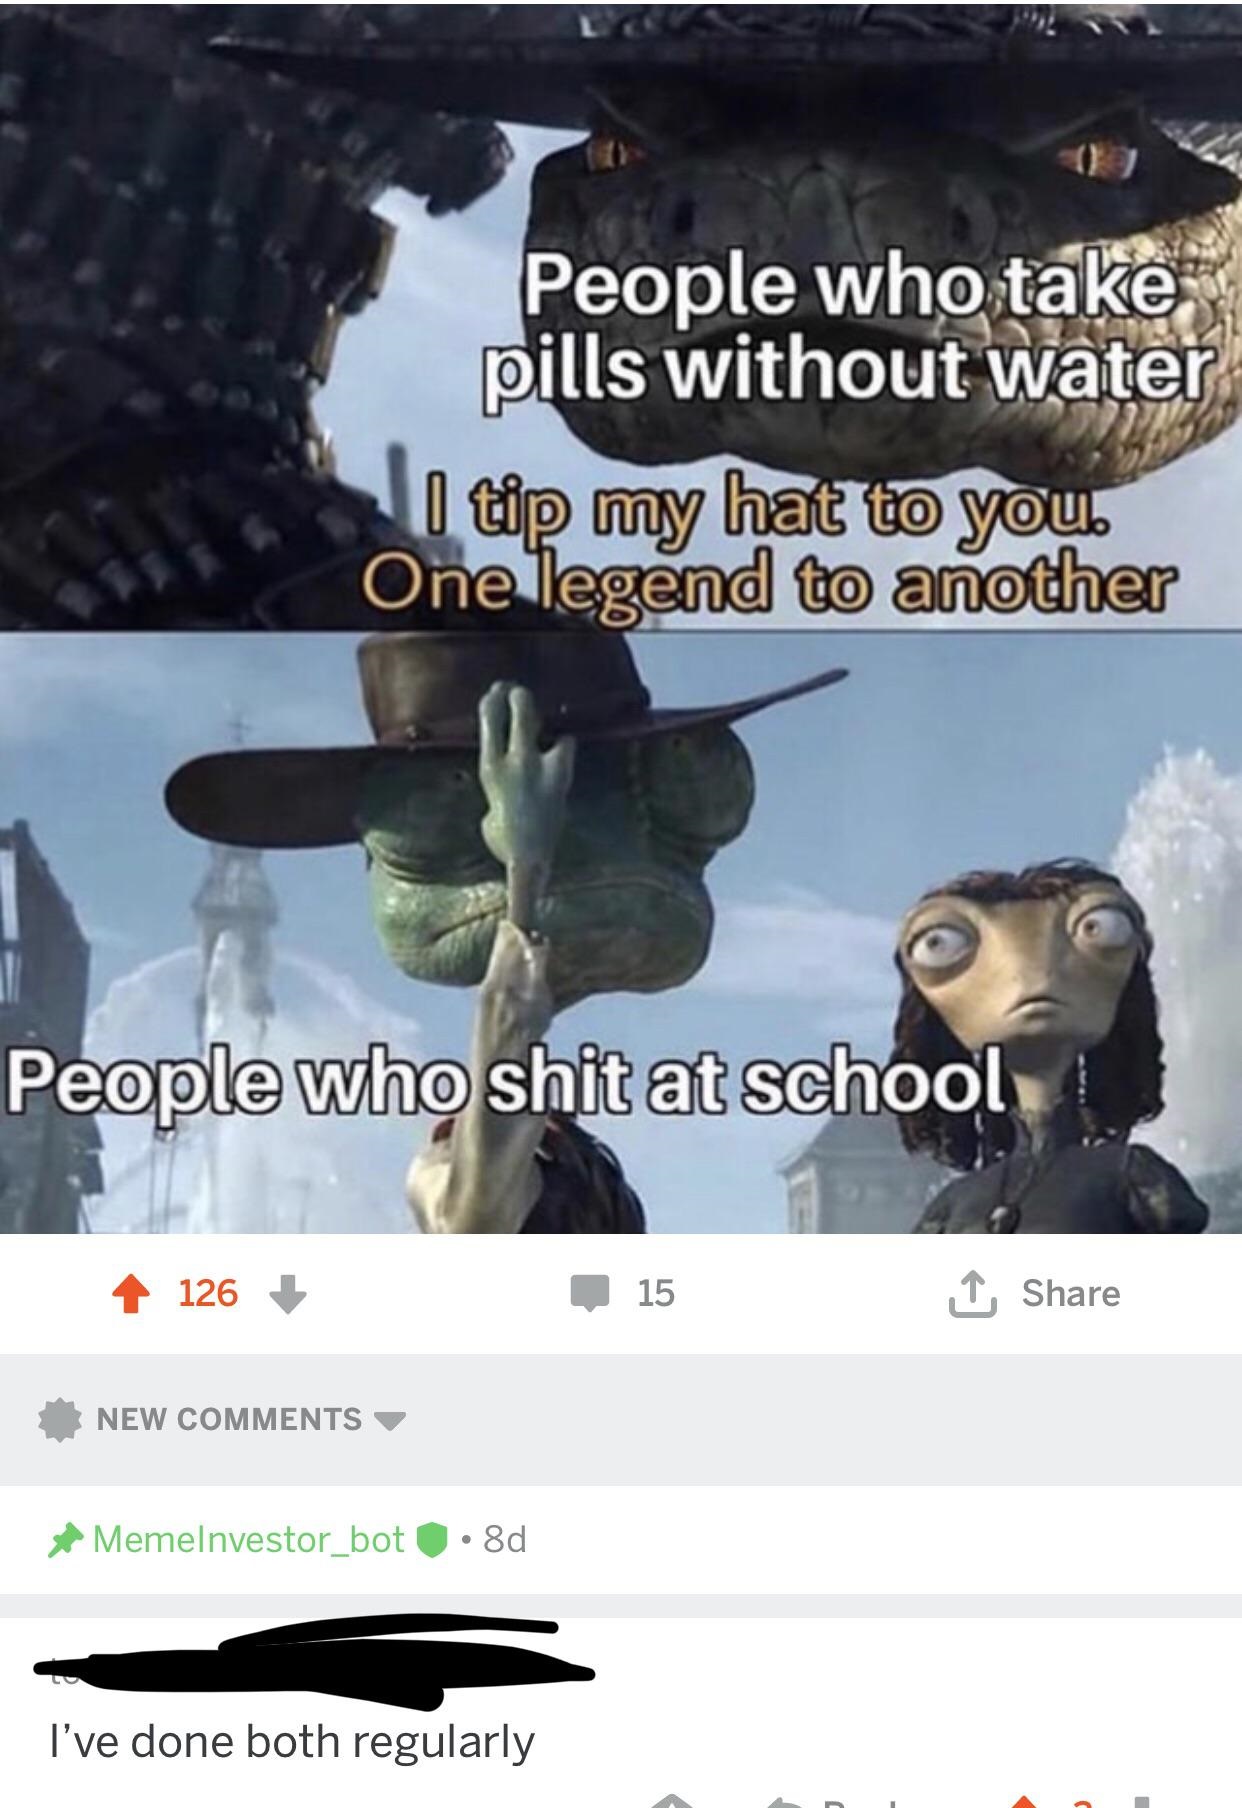 people who shit at school - People who take pills without water I tip my hat to you. One legend to another People who shit at school 4 126 15 1 New Memelnvestor_bot 1.8d I've done both regularly